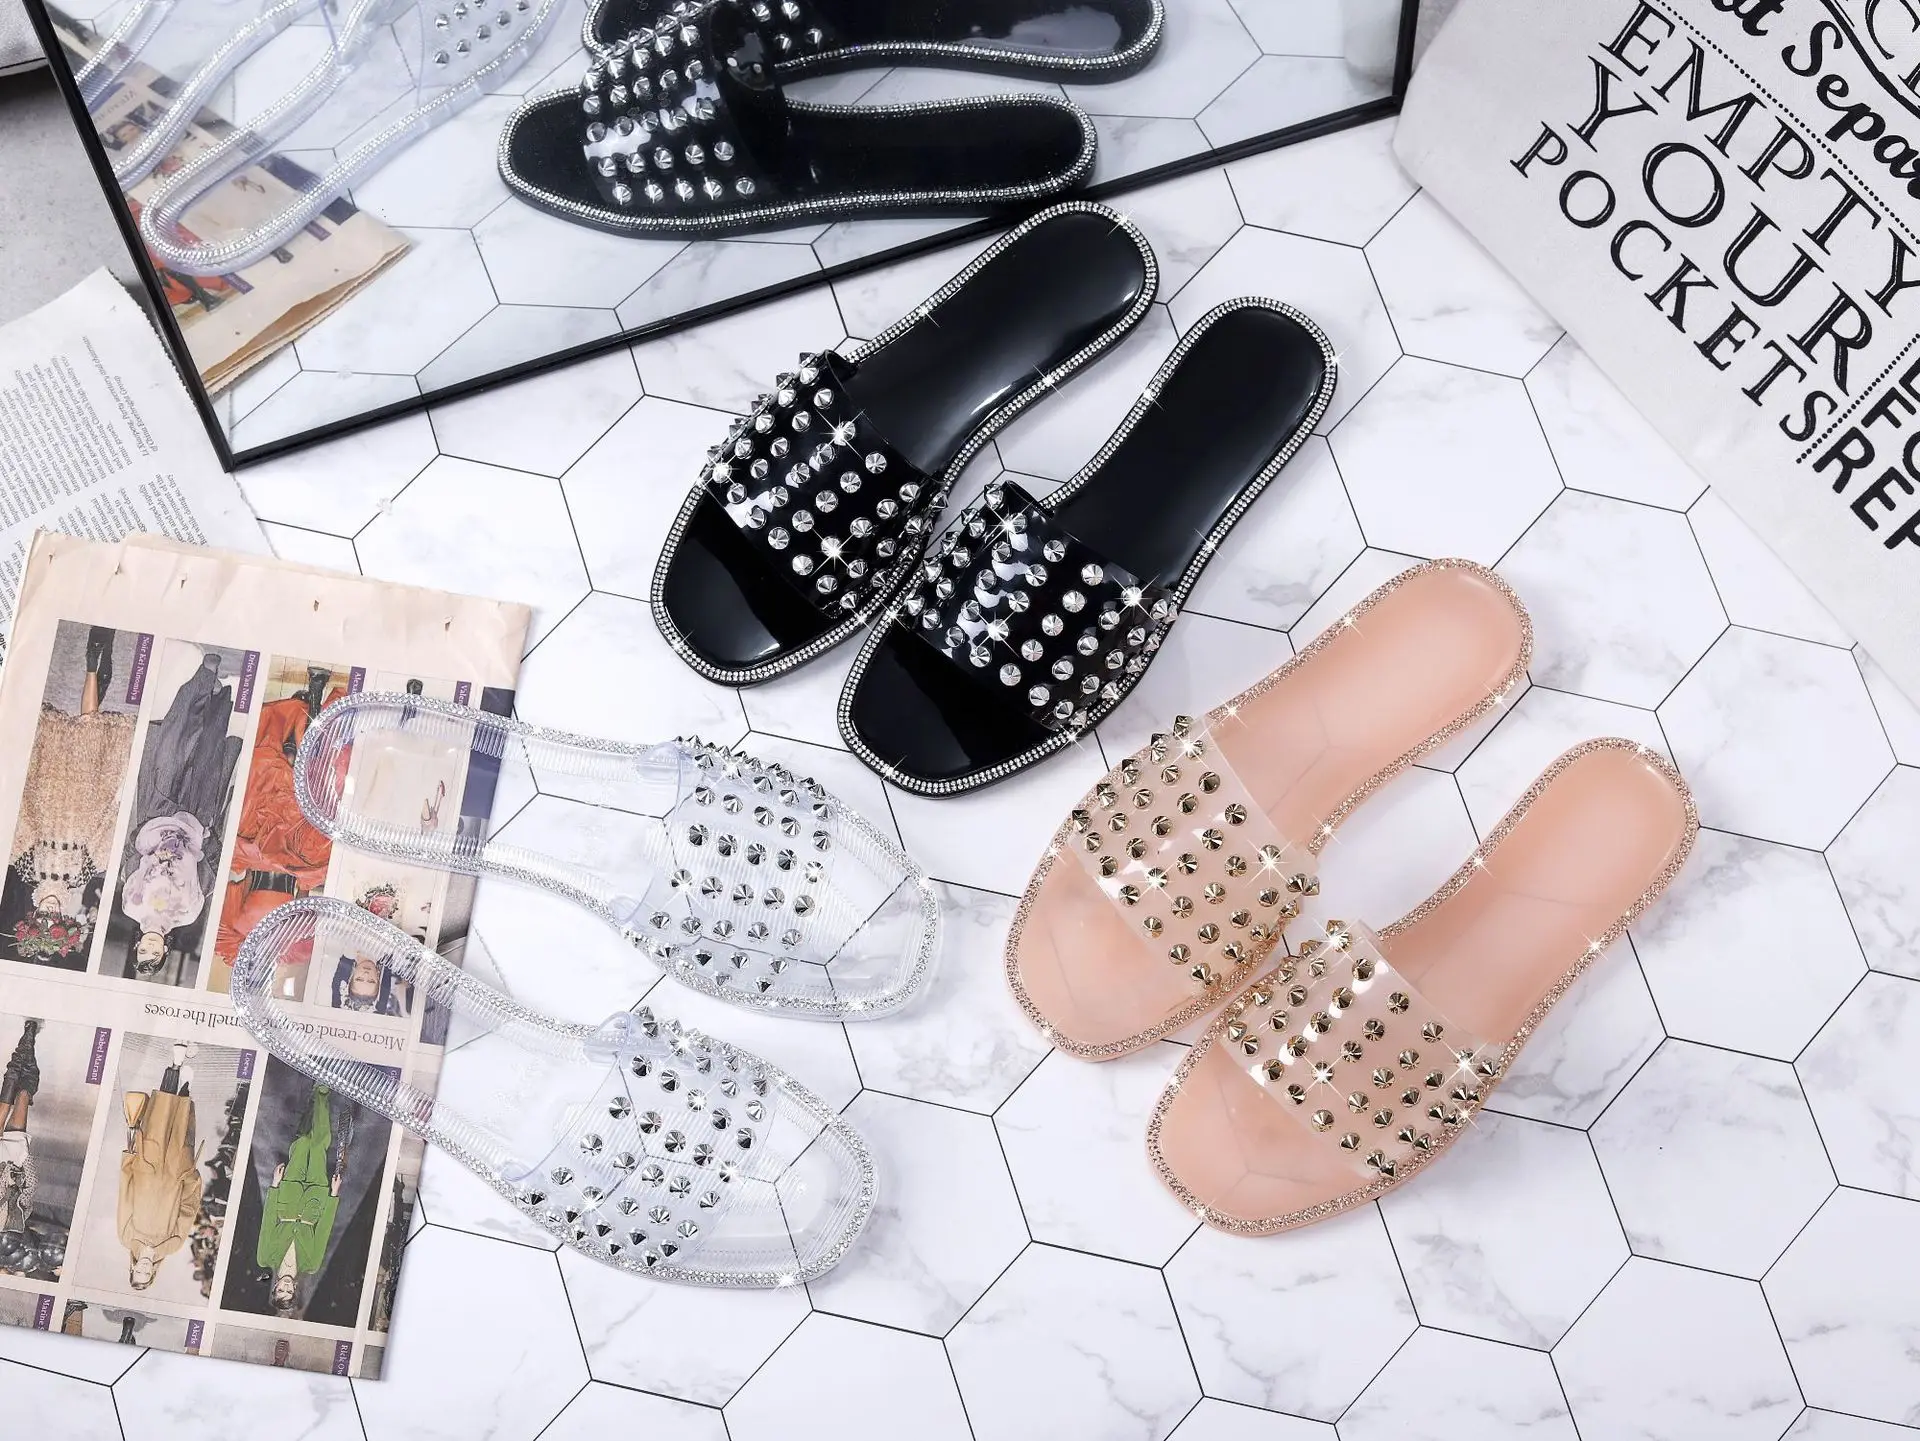 2022 Summer Slides Slippers New Women"e;s Shoes Amazon Transparent Jelly Pvc Rivet Pointed Nail Rhinestone Slippers Sandals